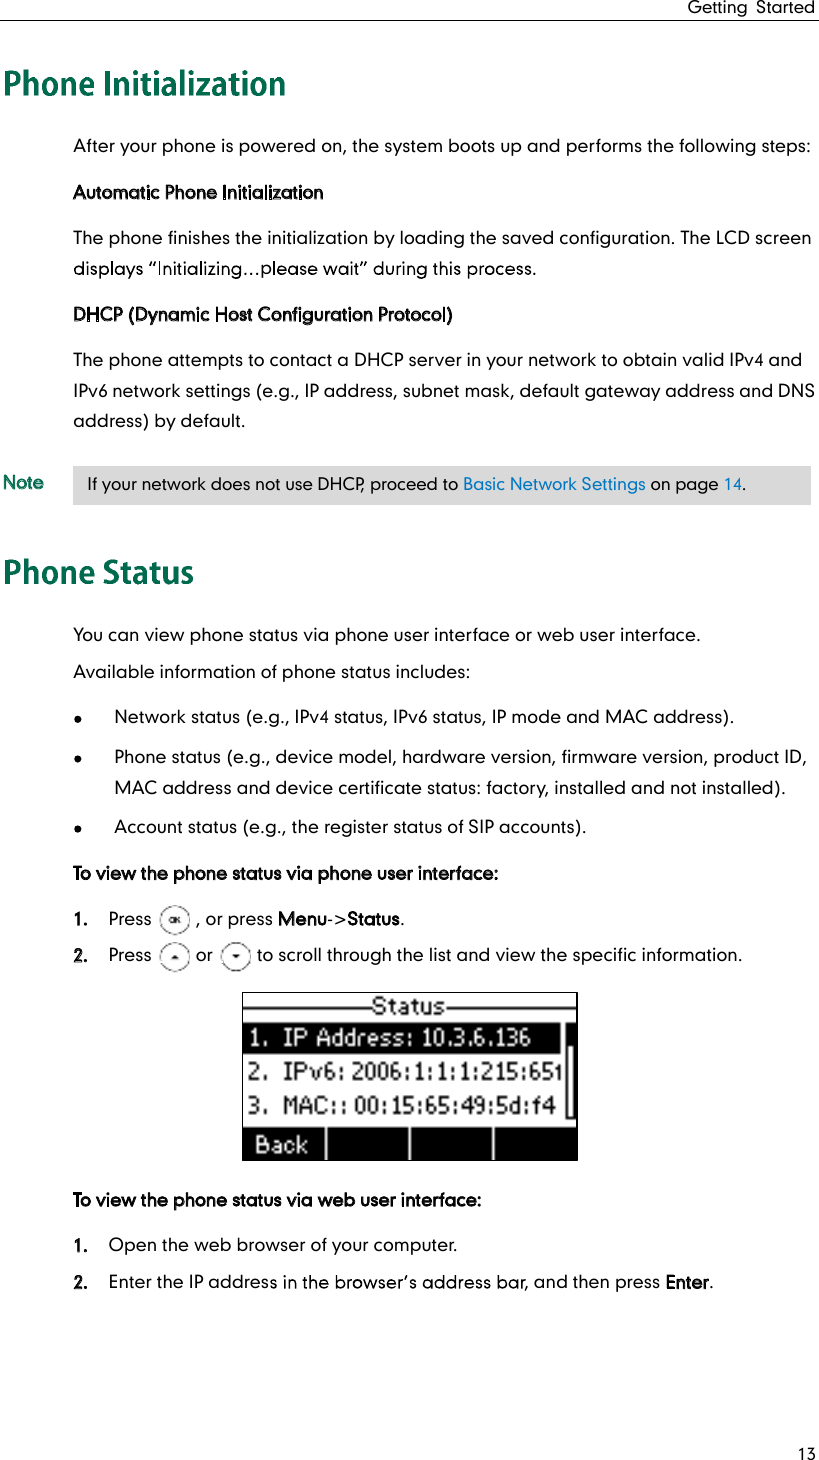 Getting Started 13 After your phone is powered on, the system boots up and performs the following steps: Automatic Phone Initialization The phone finishes the initialization by loading the saved configuration. The LCD screen p  DHCP (Dynamic Host Configuration Protocol) The phone attempts to contact a DHCP server in your network to obtain valid IPv4 and IPv6 network settings (e.g., IP address, subnet mask, default gateway address and DNS address) by default. Note You can view phone status via phone user interface or web user interface. Available information of phone status includes:  Network status (e.g., IPv4 status, IPv6 status, IP mode and MAC address).  Phone status (e.g., device model, hardware version, firmware version, product ID, MAC address and device certificate status: factory, installed and not installed).  Account status (e.g., the register status of SIP accounts). To view the phone status via phone user interface: 1. Press     , or press Menu-&gt;Status. 2. Press     or     to scroll through the list and view the specific information.  To view the phone status via web user interface: 1. Open the web browser of your computer. 2. Enter the IP addres , and then press Enter.    If your network does not use DHCP, proceed to Basic Network Settings on page 14. 